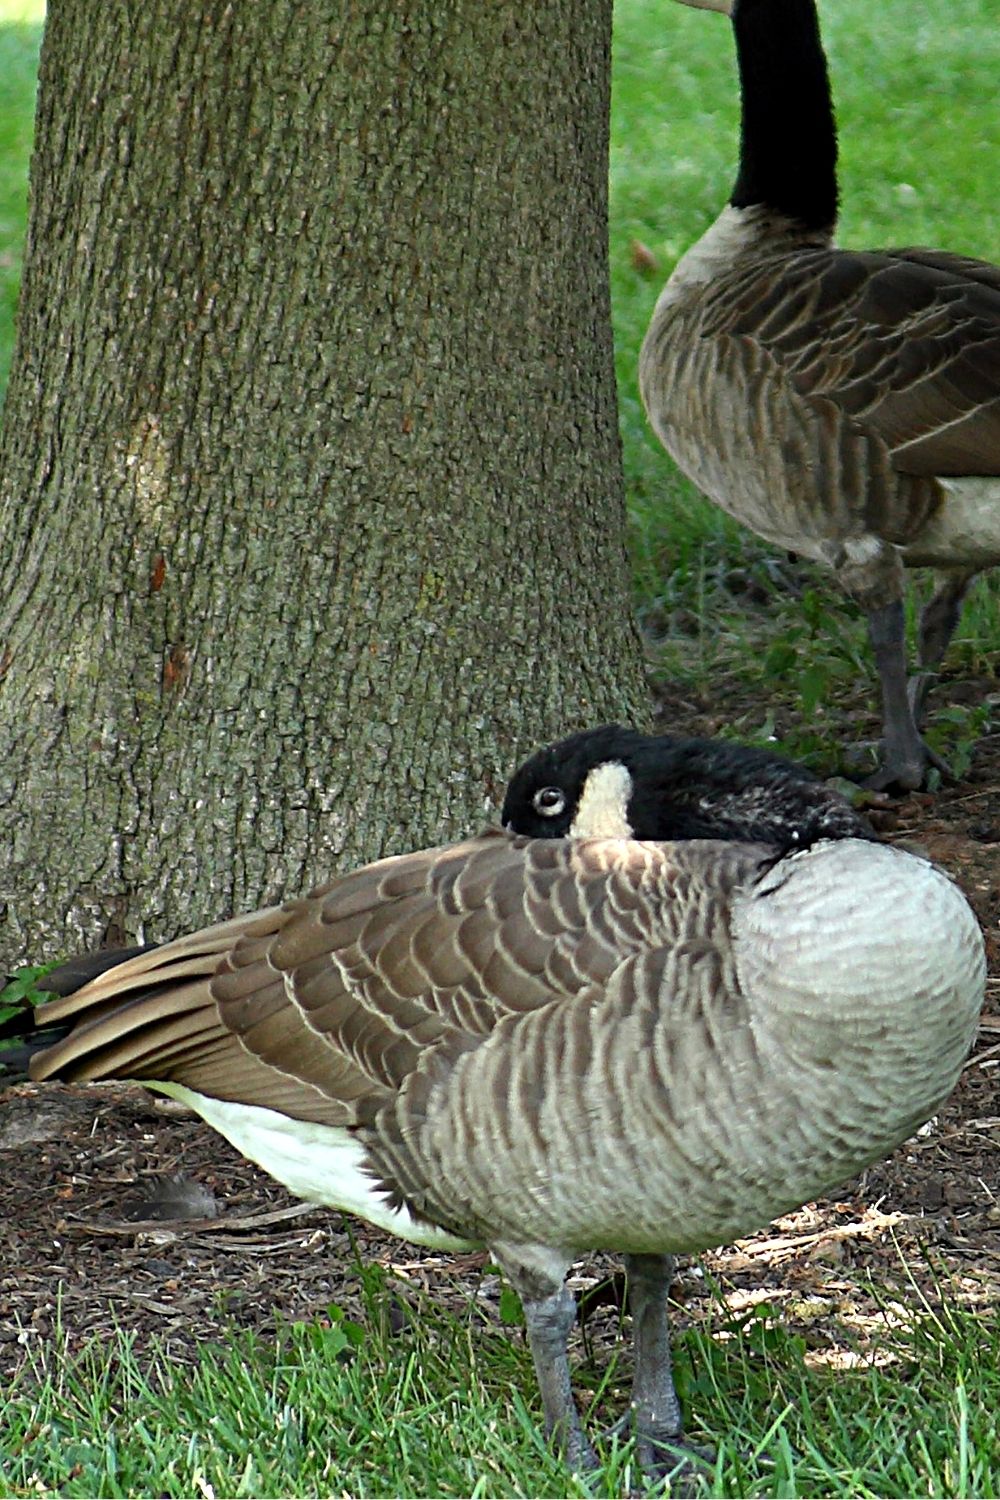 Geese sleep with one of their eyes open or partially open